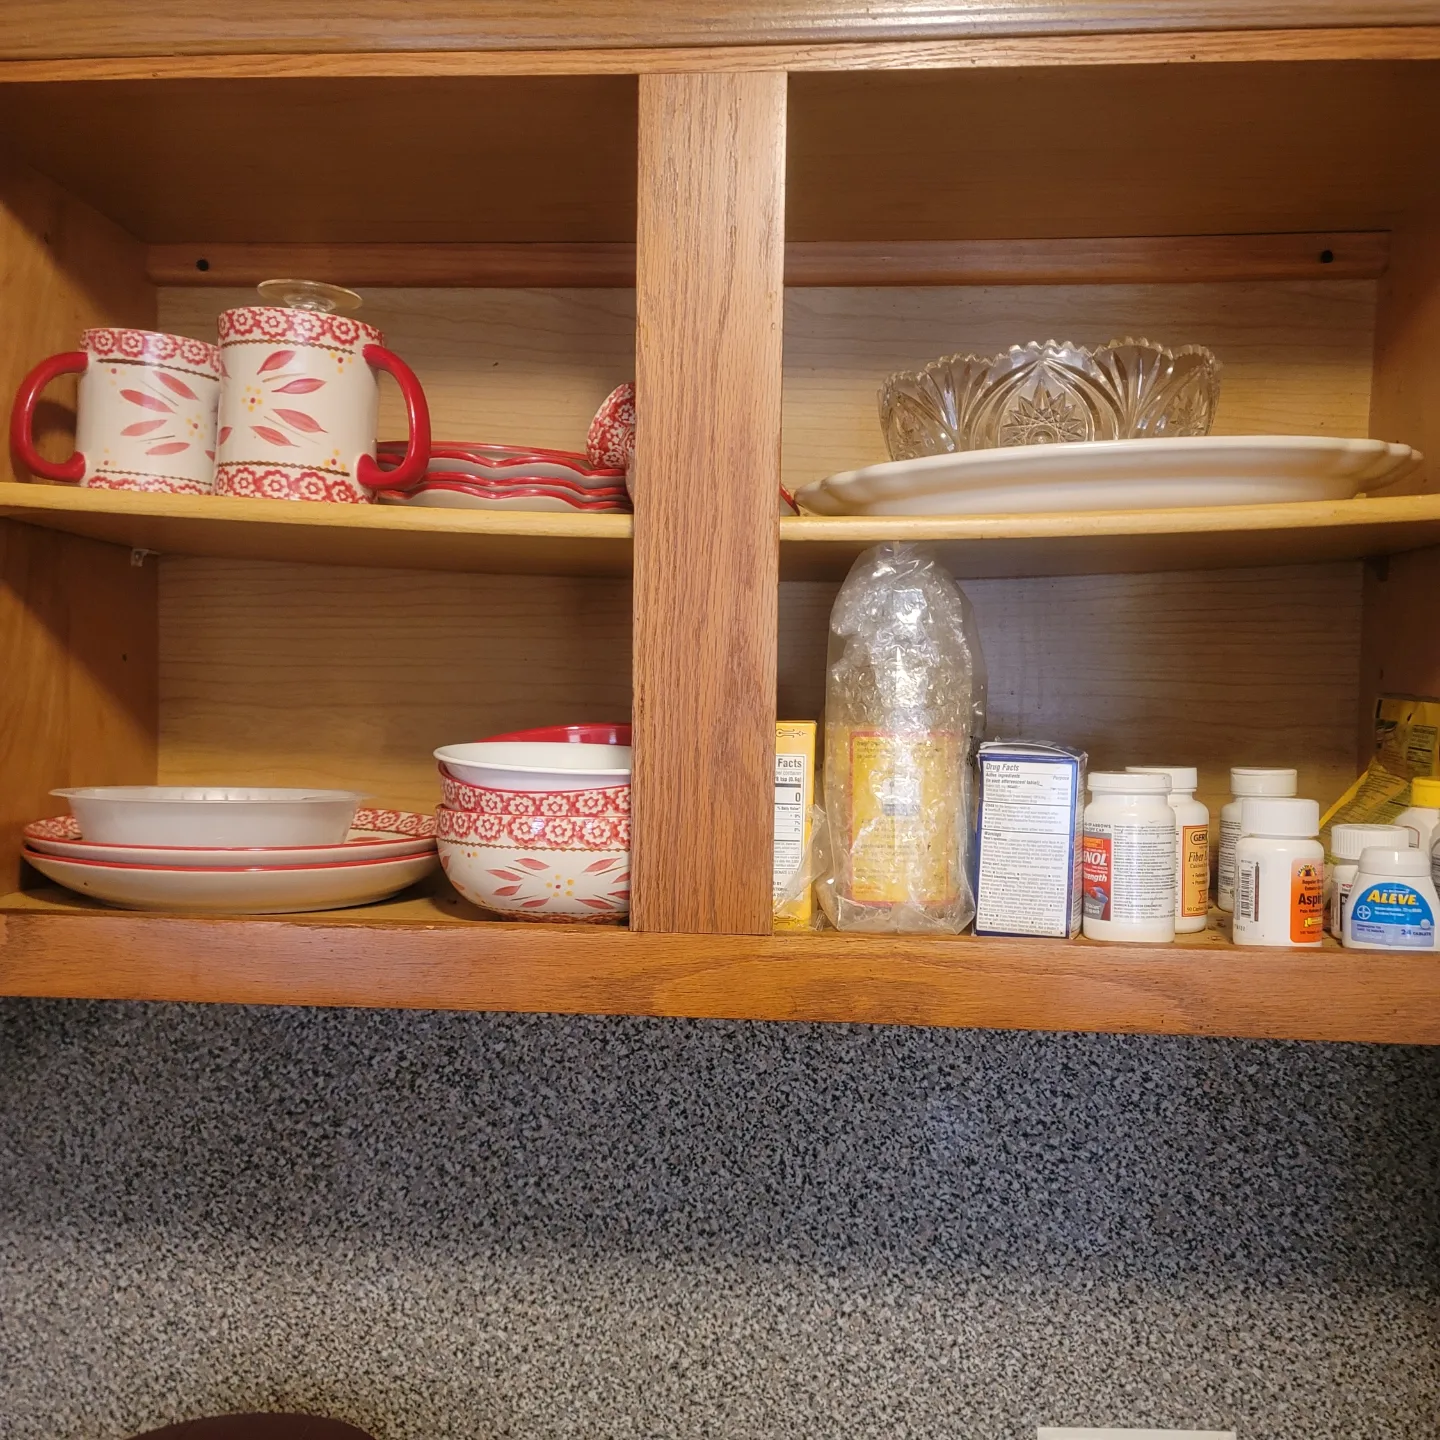 A cabinet with kitchen items and food products